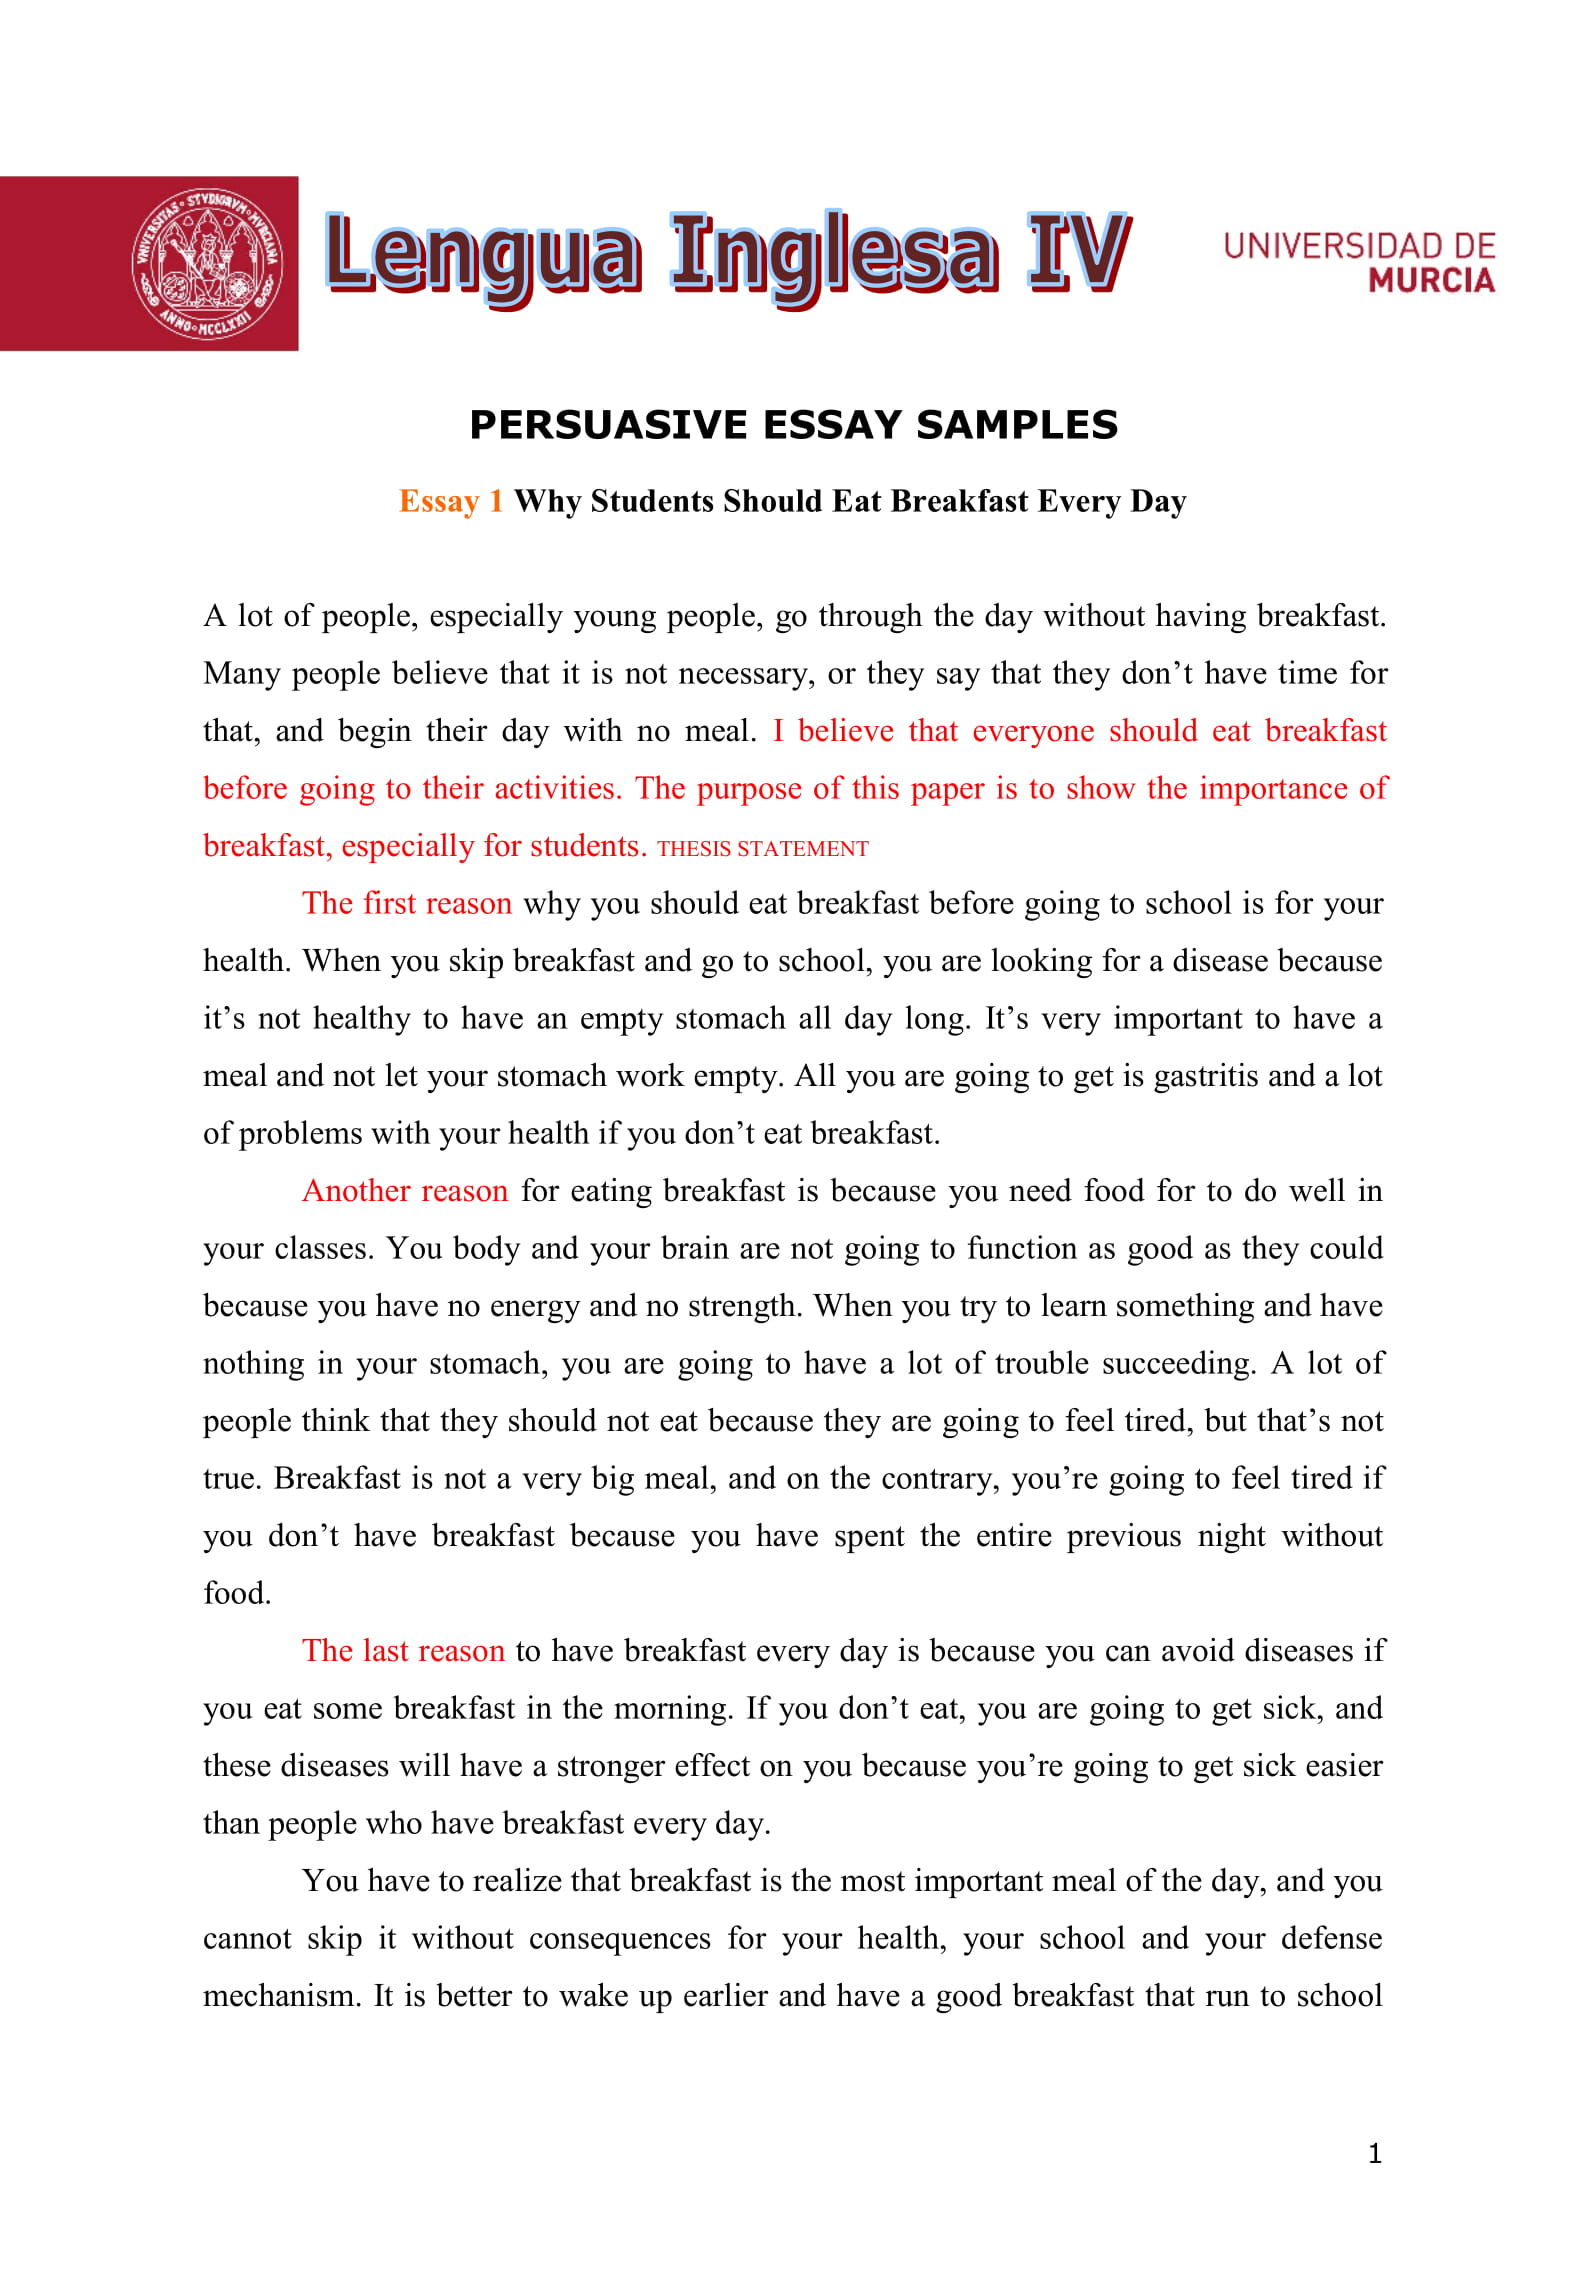 How to Write a Persuasive Essay with Examples - PDF | Examples